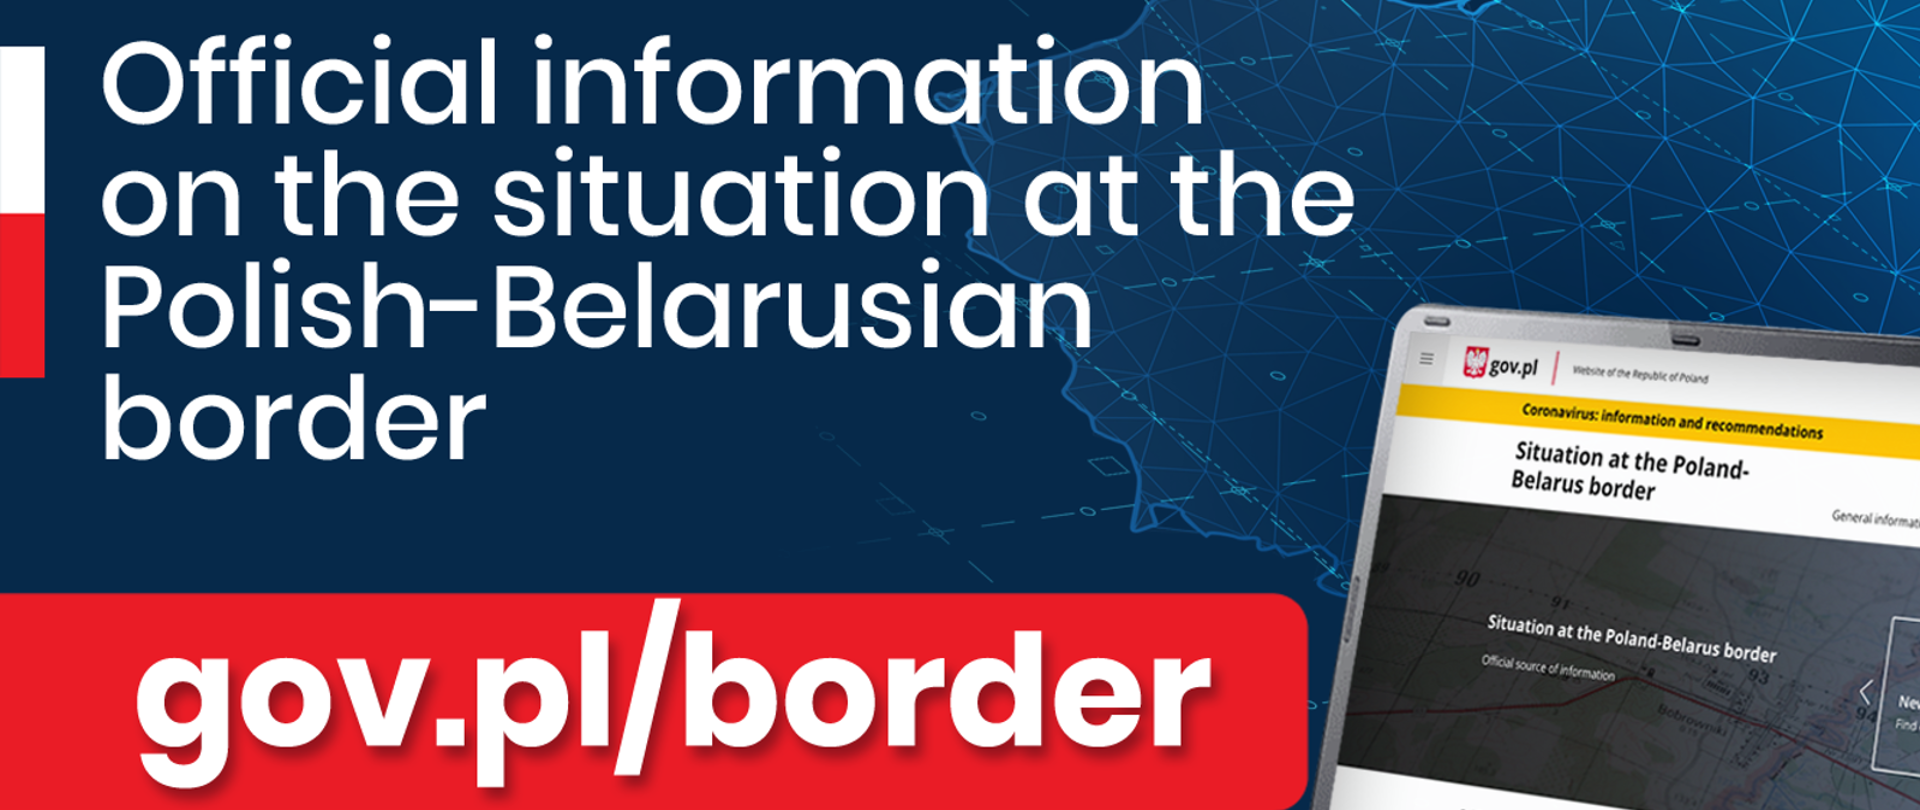 The website of the Prime Minister's Office on the situation on the Polish-Belarusian border